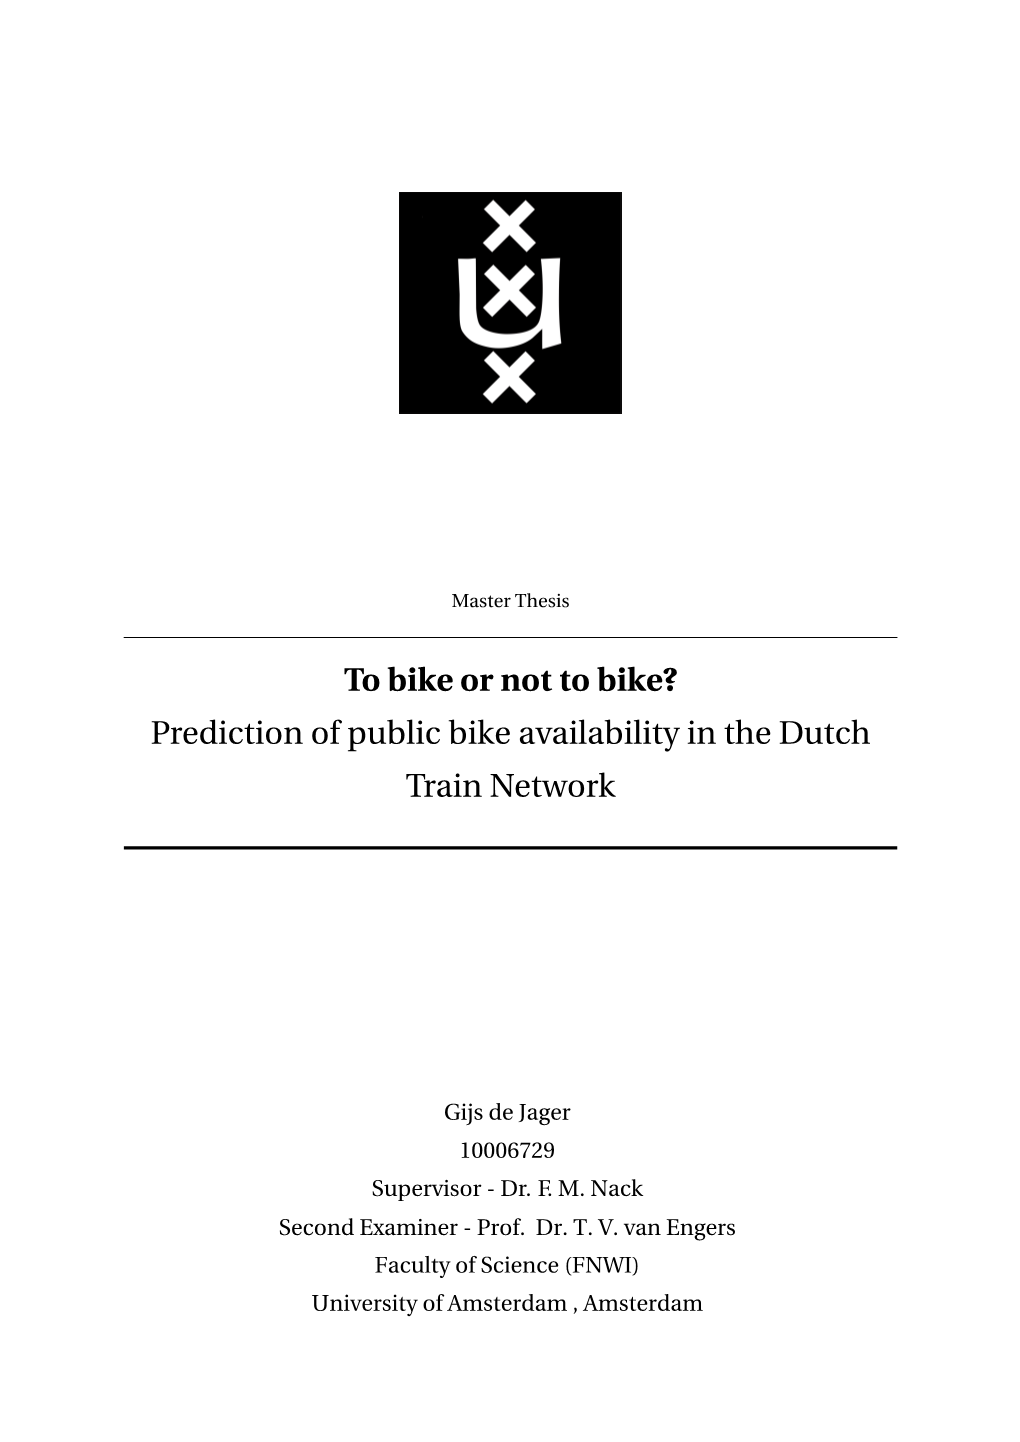 To Bike Or Not to Bike? Prediction of Public Bike Availability in the Dutch Train Network